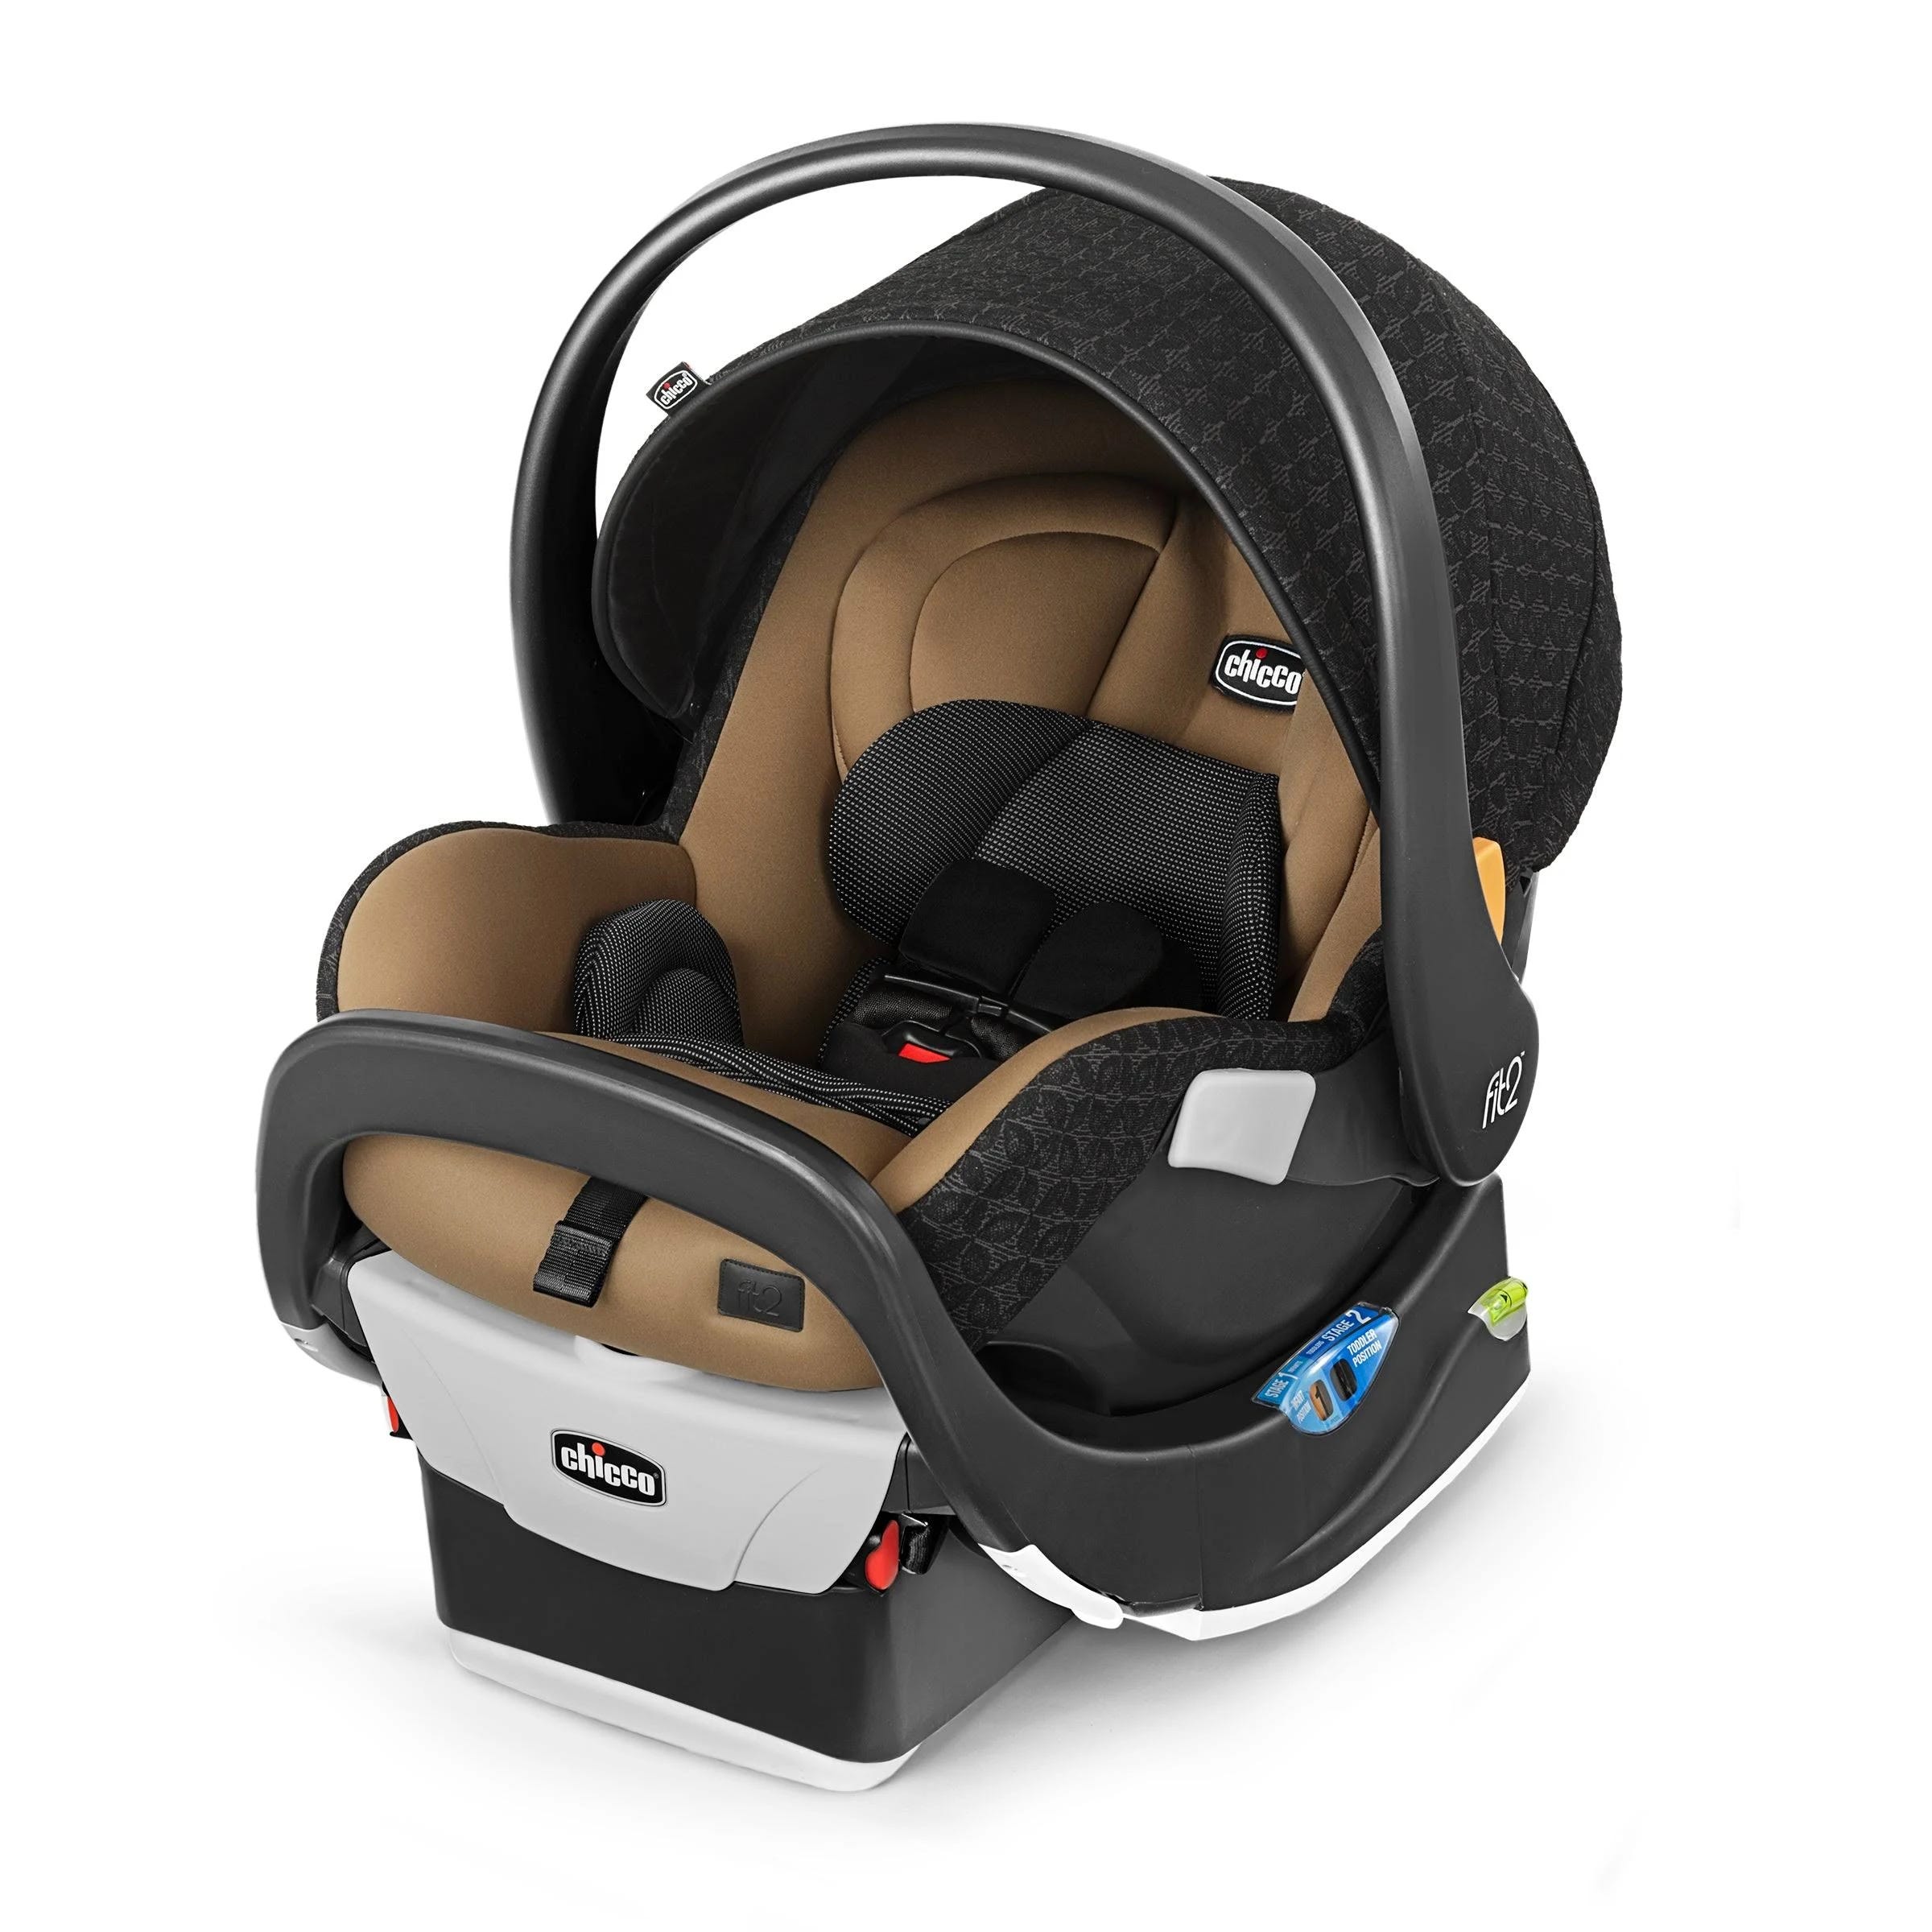 Chicco Fit2 Infant and Toddler Car Seat: 2-in-1 Rear-Facing Solution for Growing Kids | Image